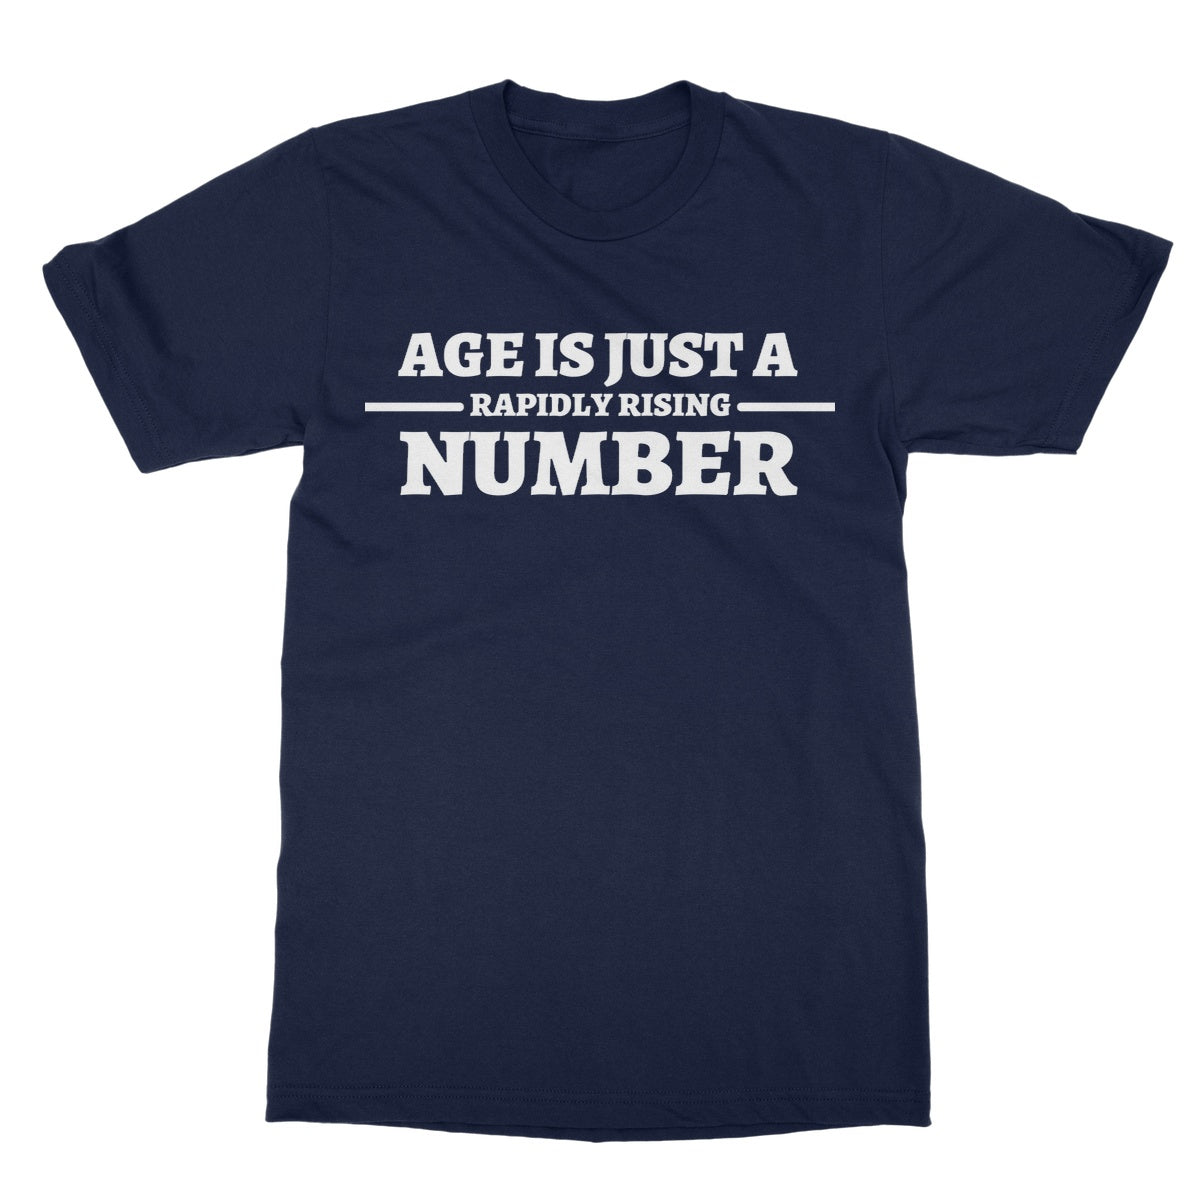 age is just a number t shirt navy